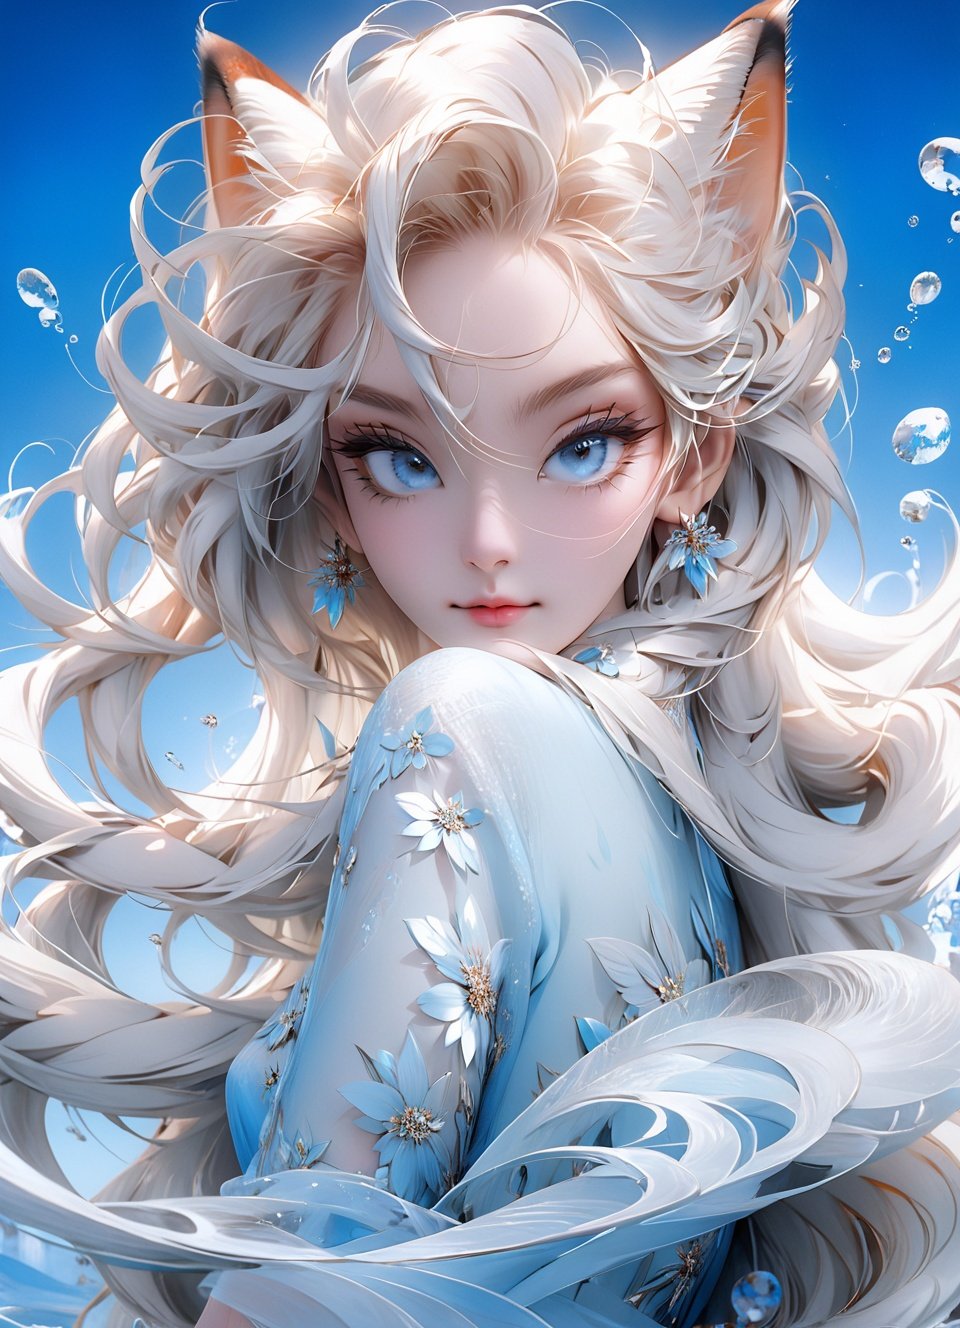 masterpiece, best quality,official art, extremelydetailed cg 8k wallpaper,(flying petals)(detailed ice) , crystalstexture skin, coldexpression, ((fox ears)),white hair, longhair, messy hair, blue eye,looking at viewer,extremely delicate andbeautiful, water, ((beautydetailed eye)), highlydetailed, cinematiclighting, ((beautiful face),fine water surface, (originalfigure painting), ultra-detailed, incrediblydetailed, (an extremelydelicate and beautiful),beautiful detailed eyes,(best quality),CHIBI,monkren